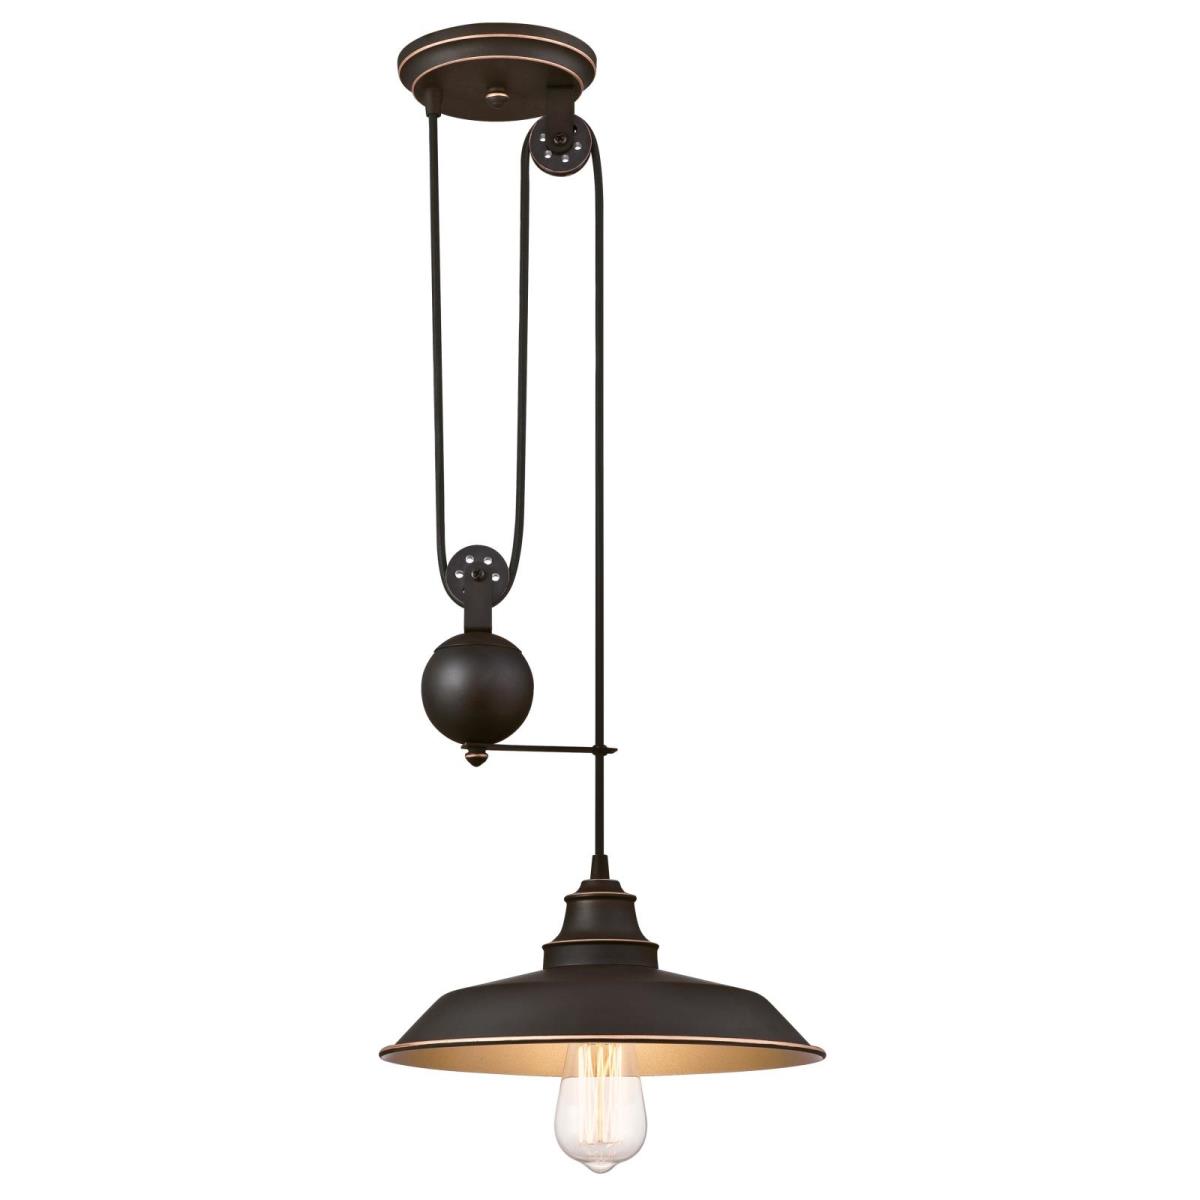 1 Light Pulley Pendant Oil Rubbed Bronze Finish with Highlights and Metal Shade